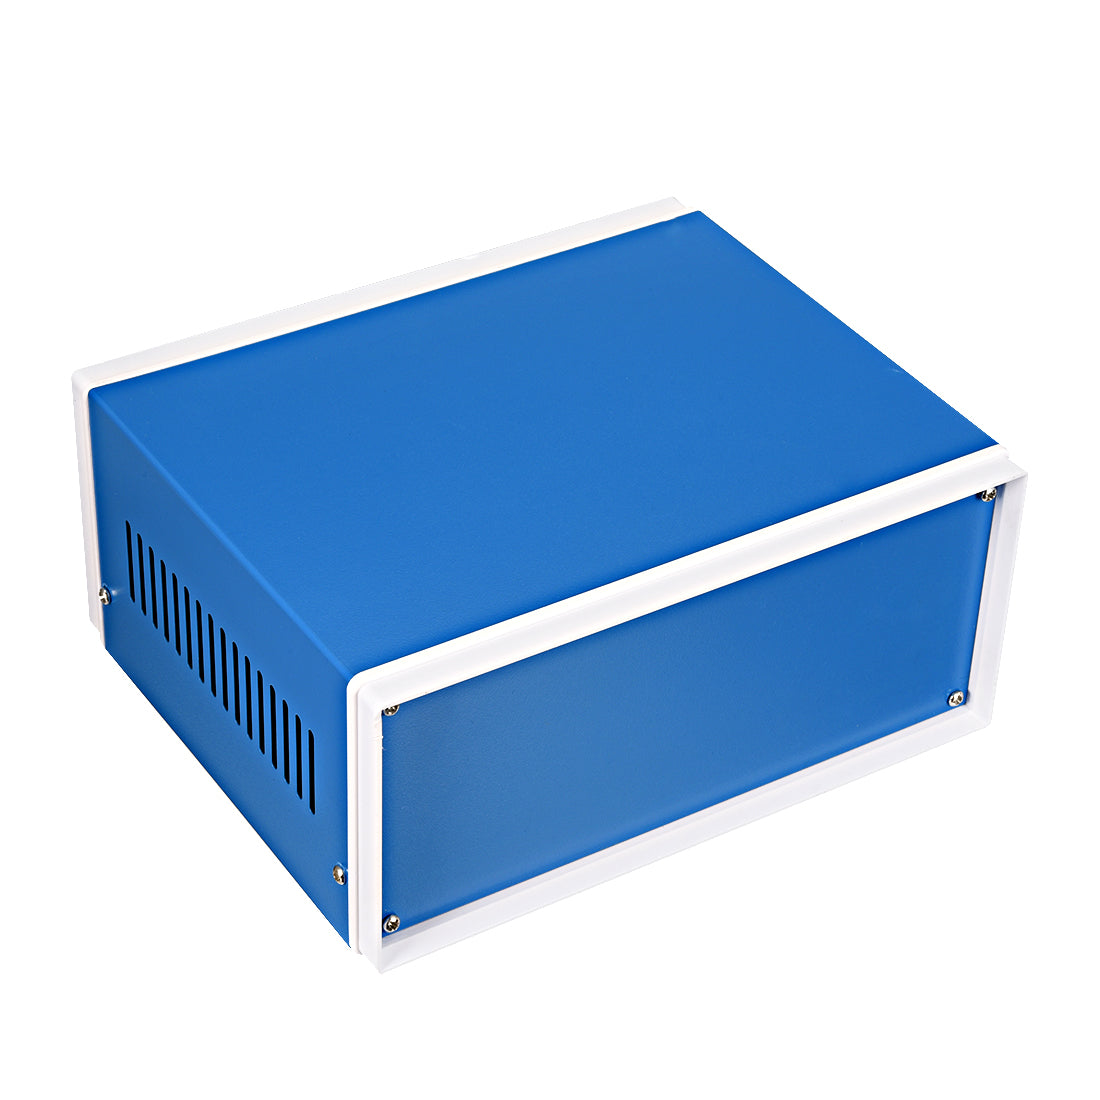 uxcell Uxcell Metal Blue Project Junction Box Enclosure Case 200 x 165 x 90mm/7.87 x 6.5 x 3.54inch